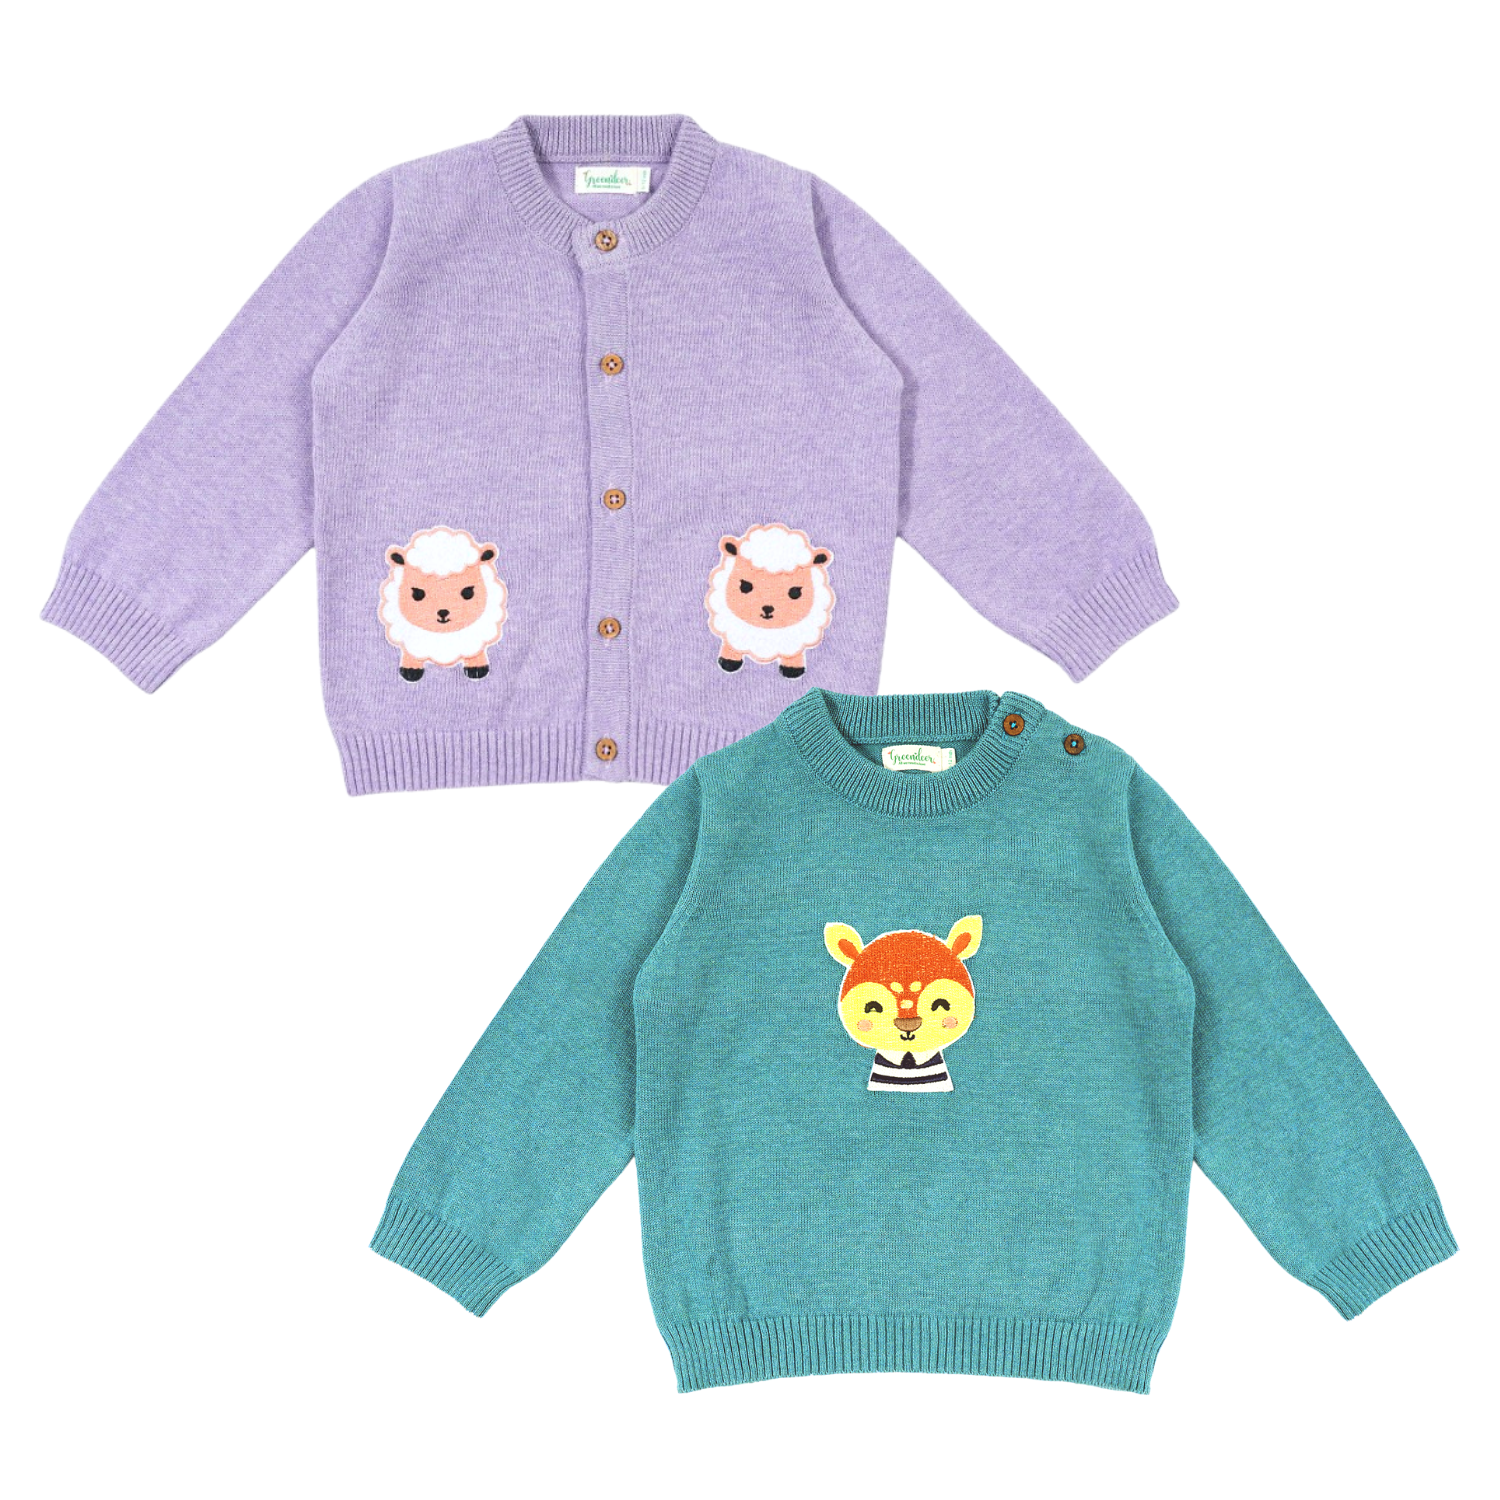 Lavender and Teal Sheep and Reindeer Sweater Combo Set of 2